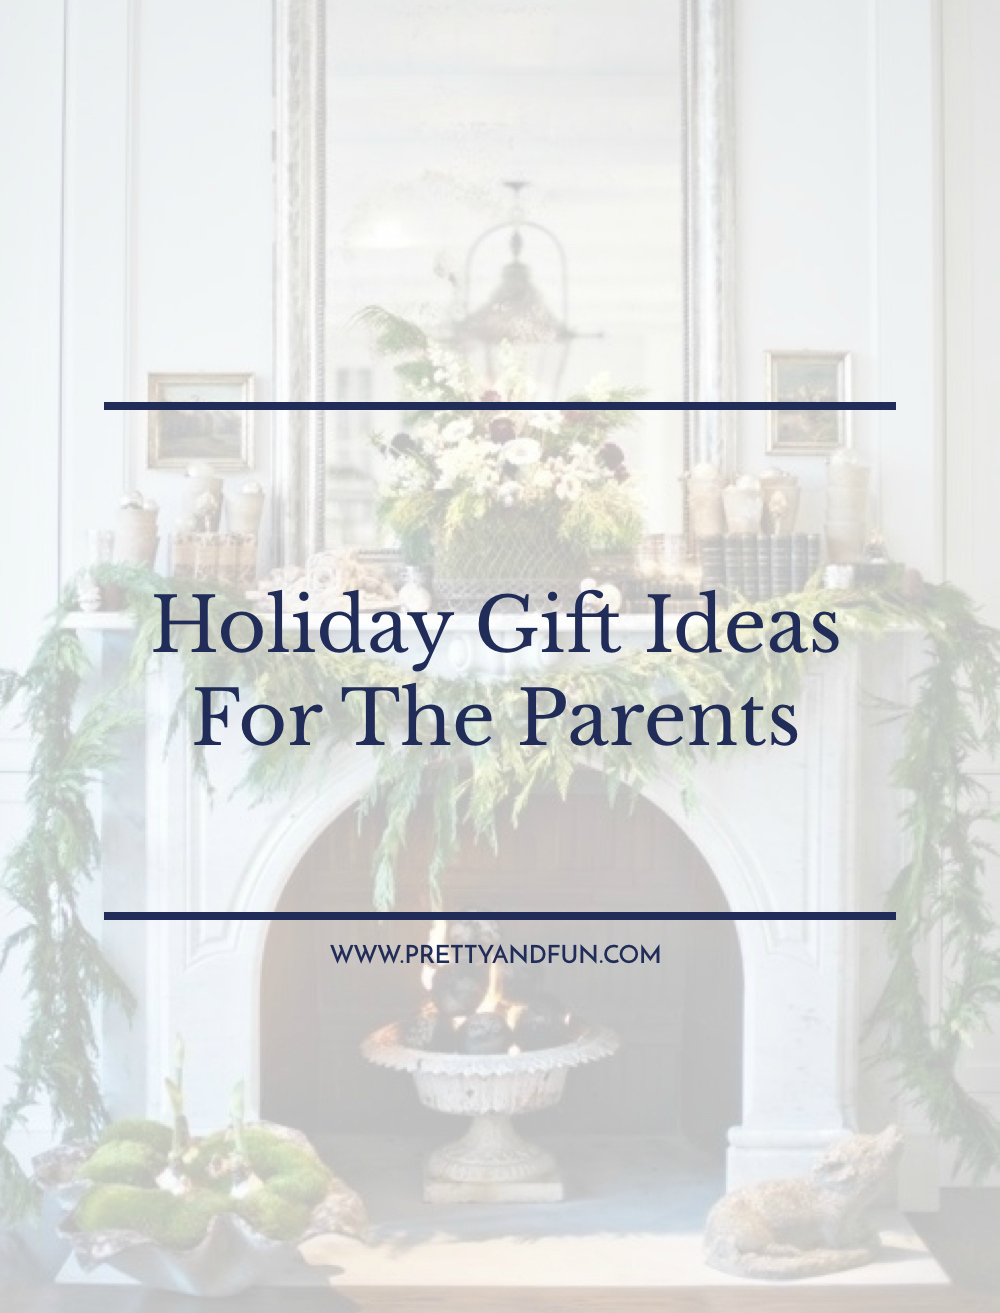 The Best Holiday Gift Ideas for Parents.